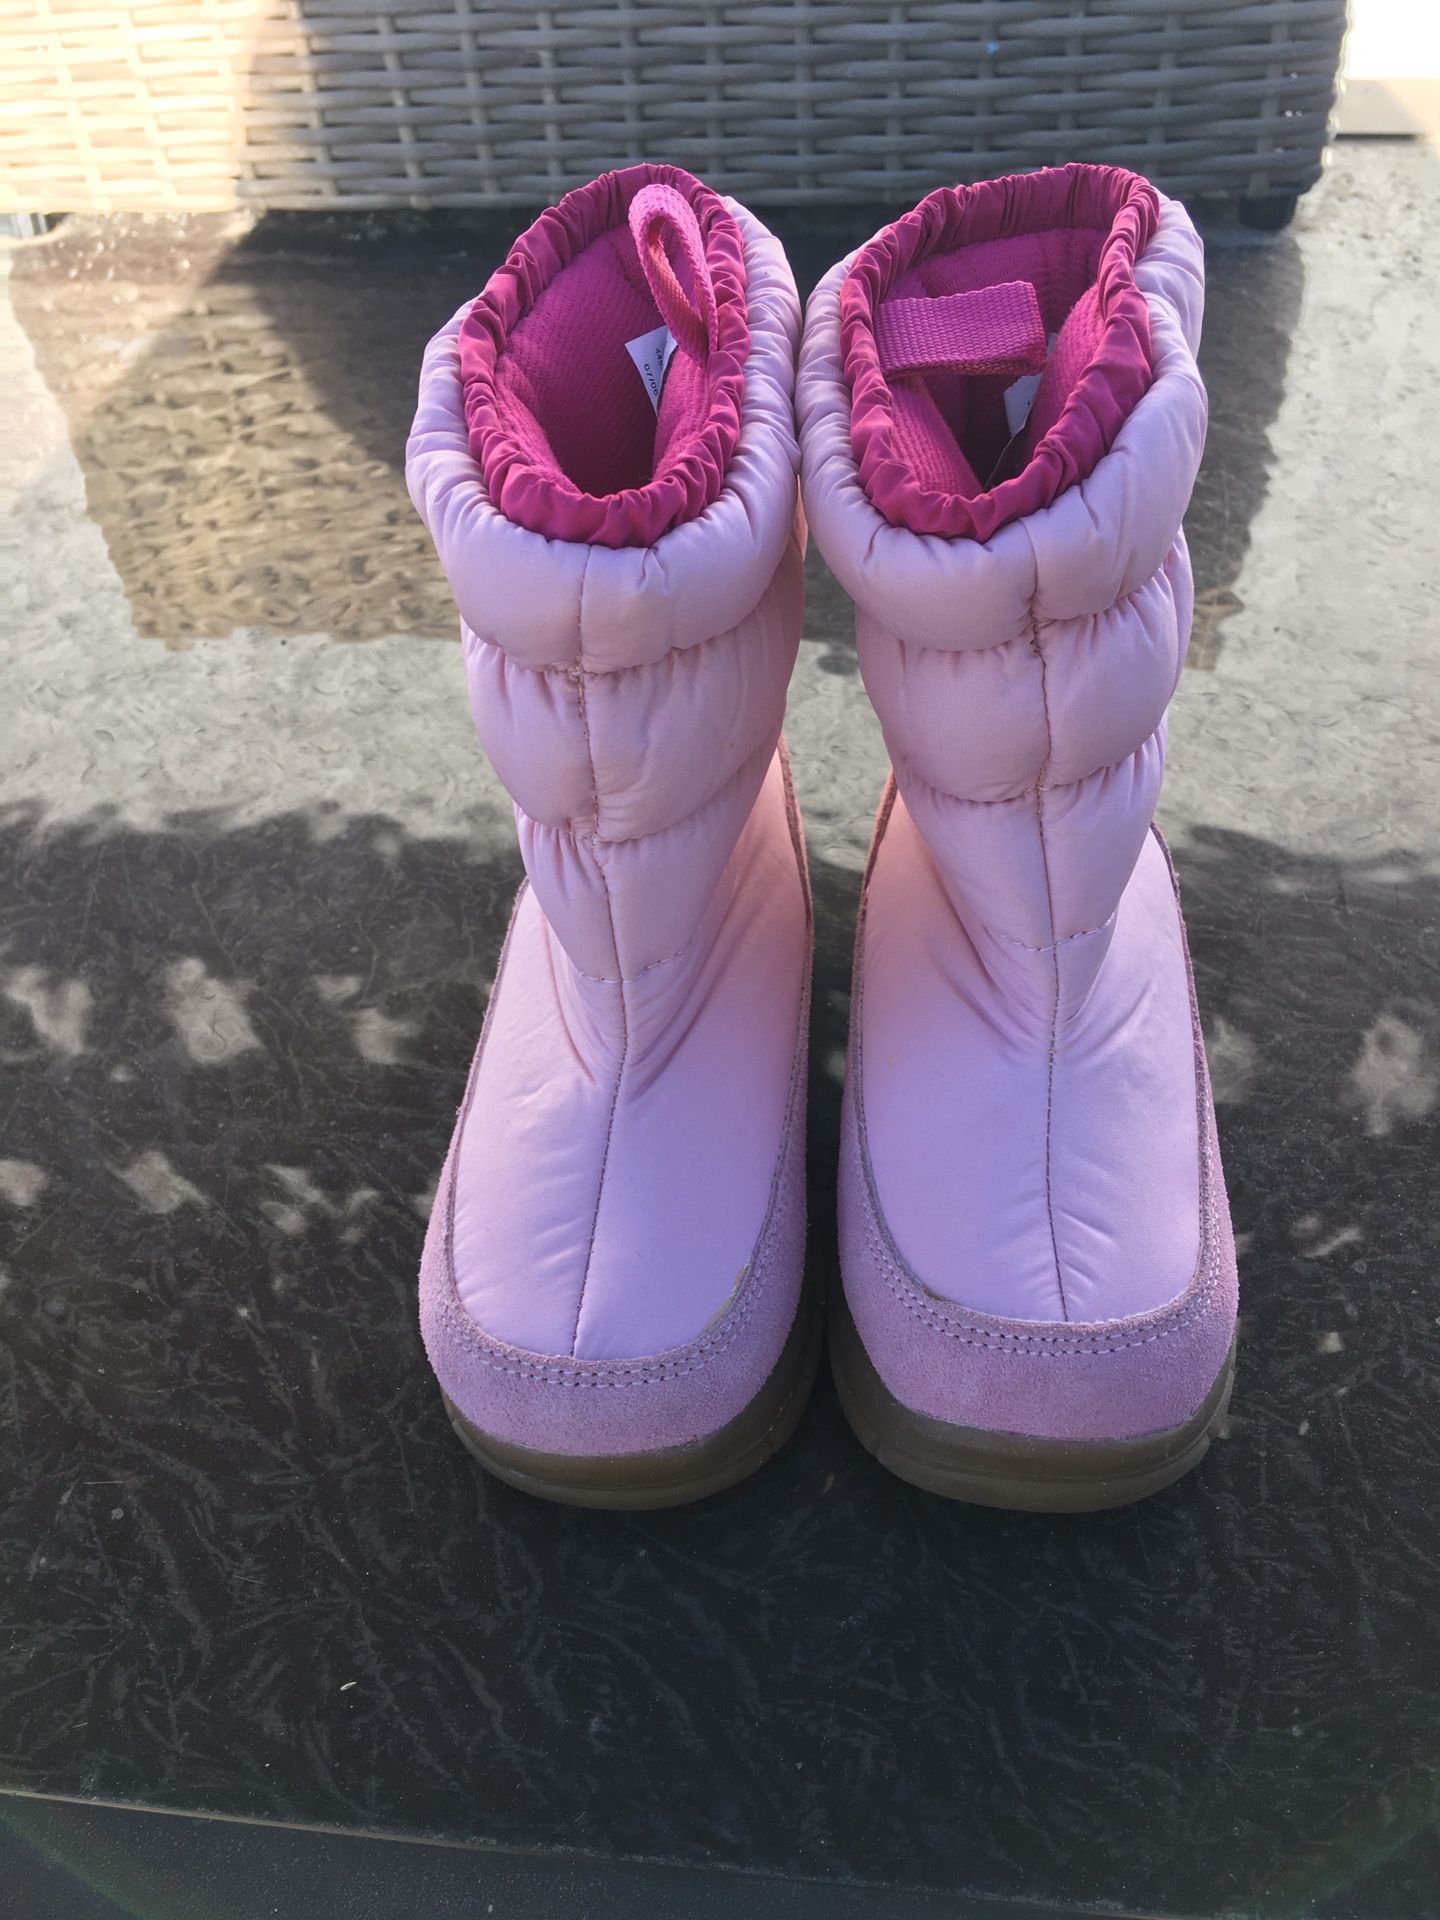 Pink Gap Toddler boots size 6